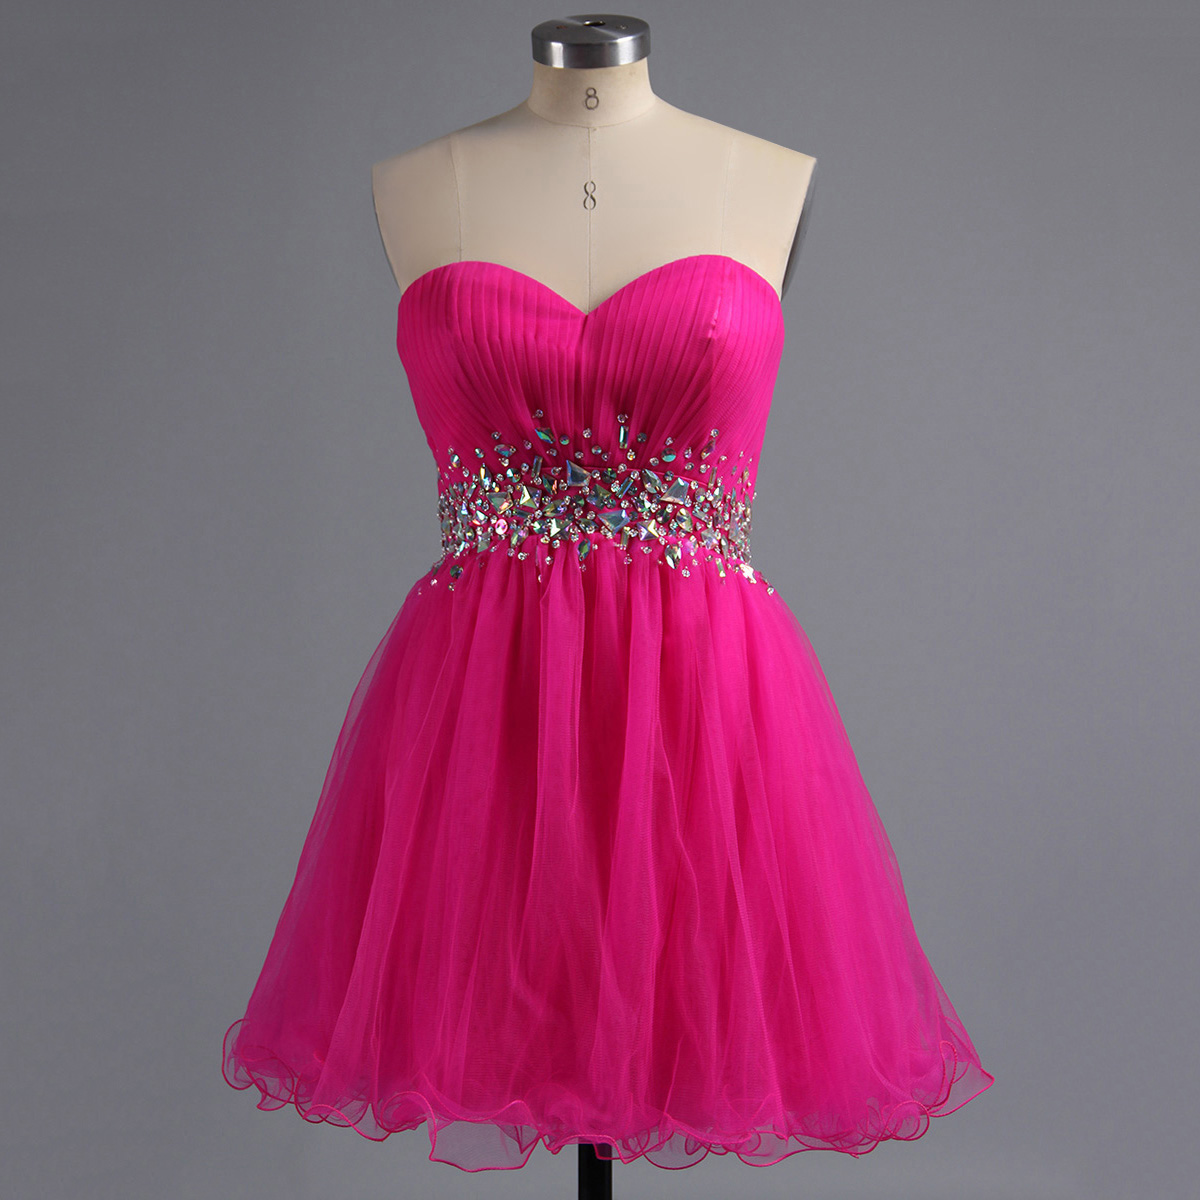 Sweetheart Homecoming Dress, Cute Mini Tulle Homecoming Dress with Crystal Belt, A-line Homecoming Dress with Pleats